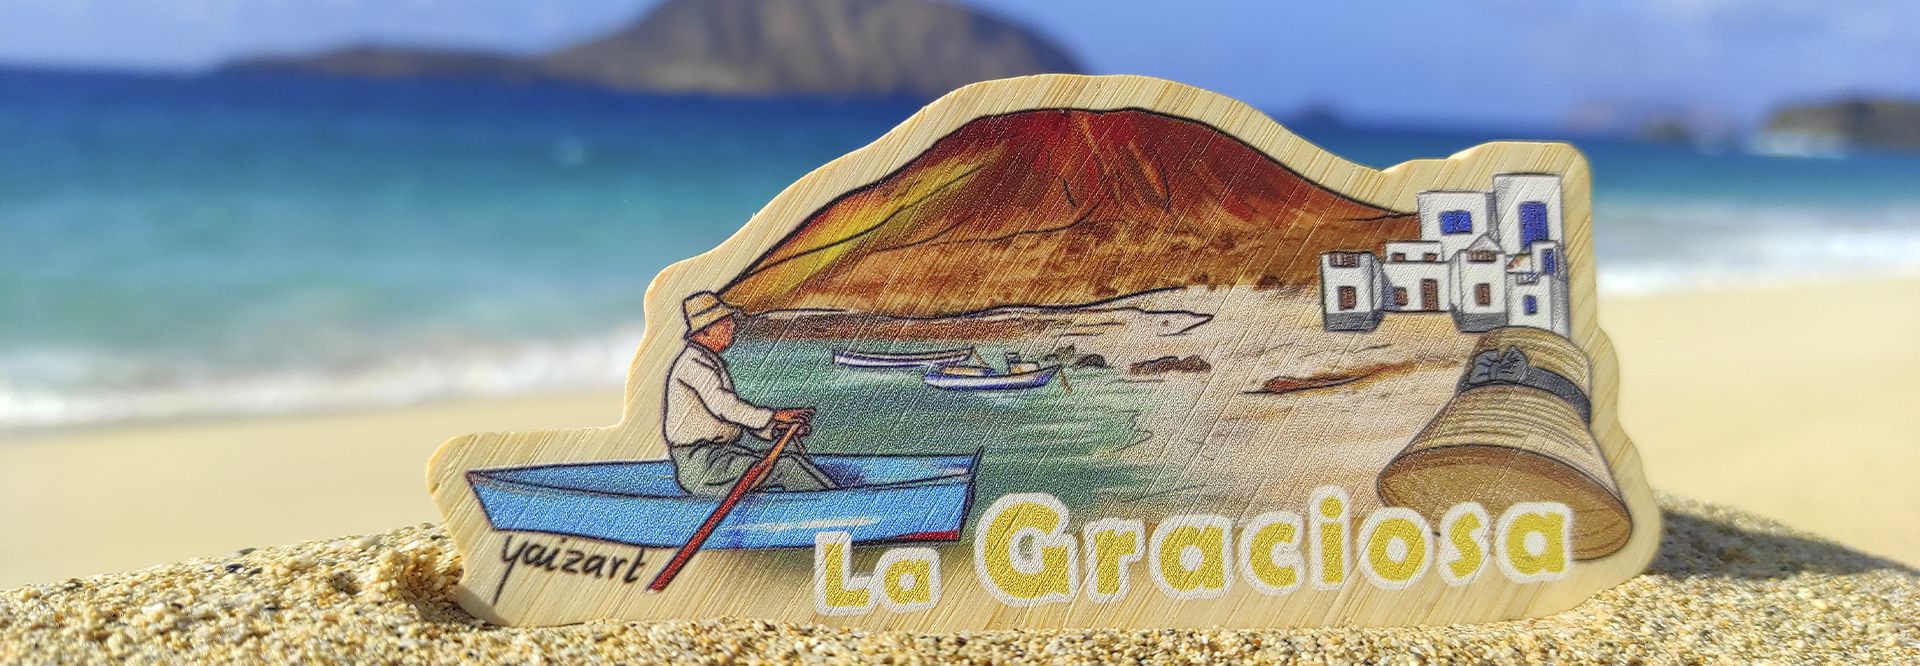 How to visit the island of La Graciosa. Lanzarote tourist guide and plans.